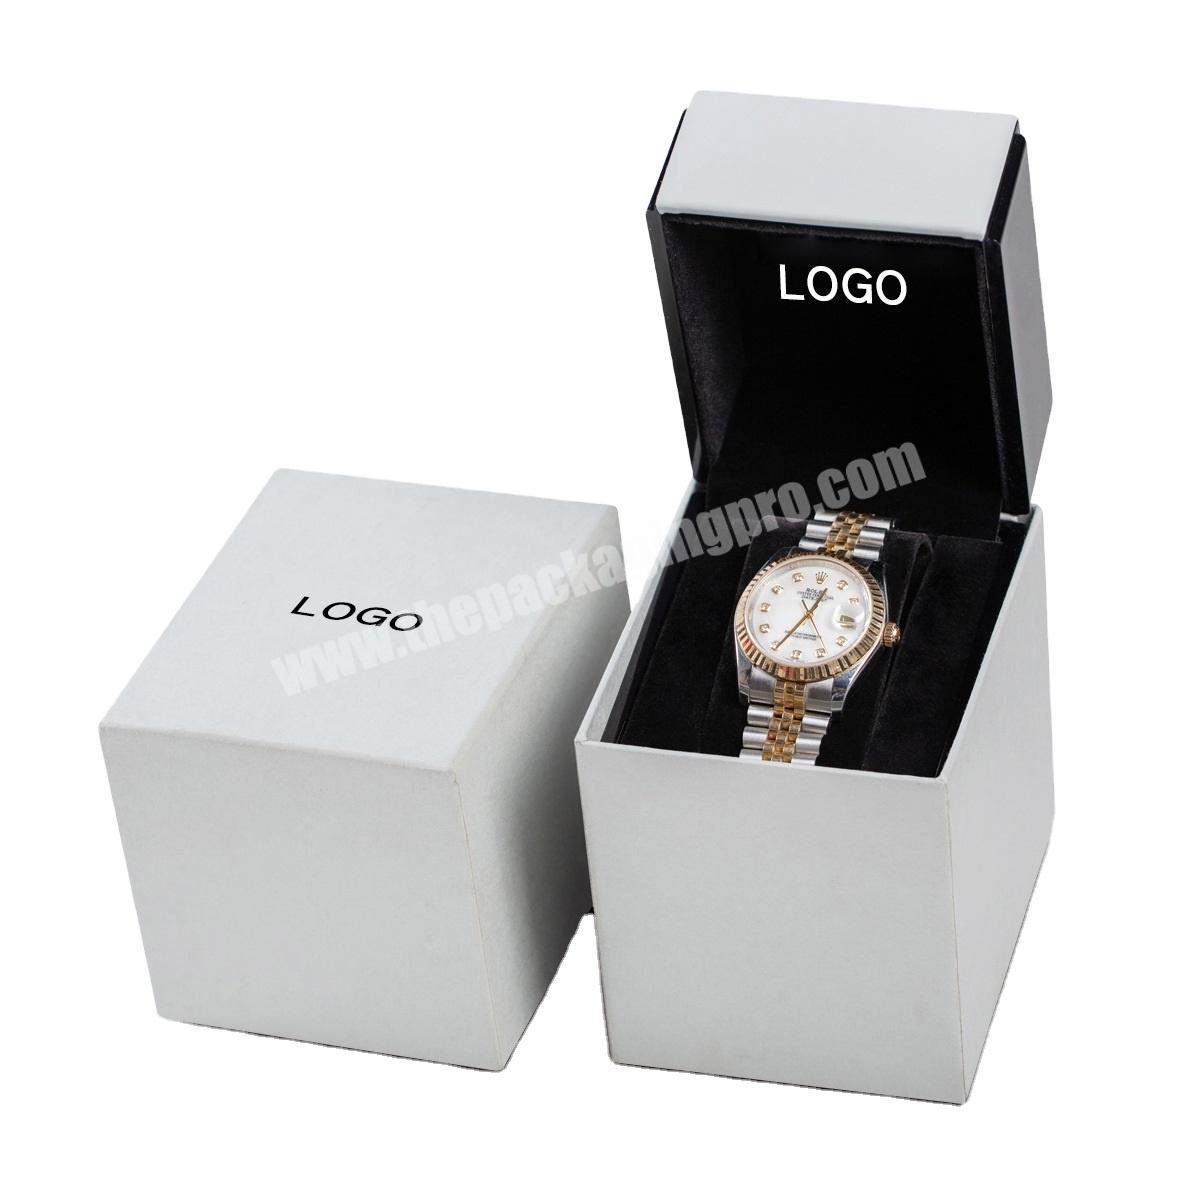 Manufacturer-customized cartons for high-end watch packaging Hot Selling Product High Quality & Best Price